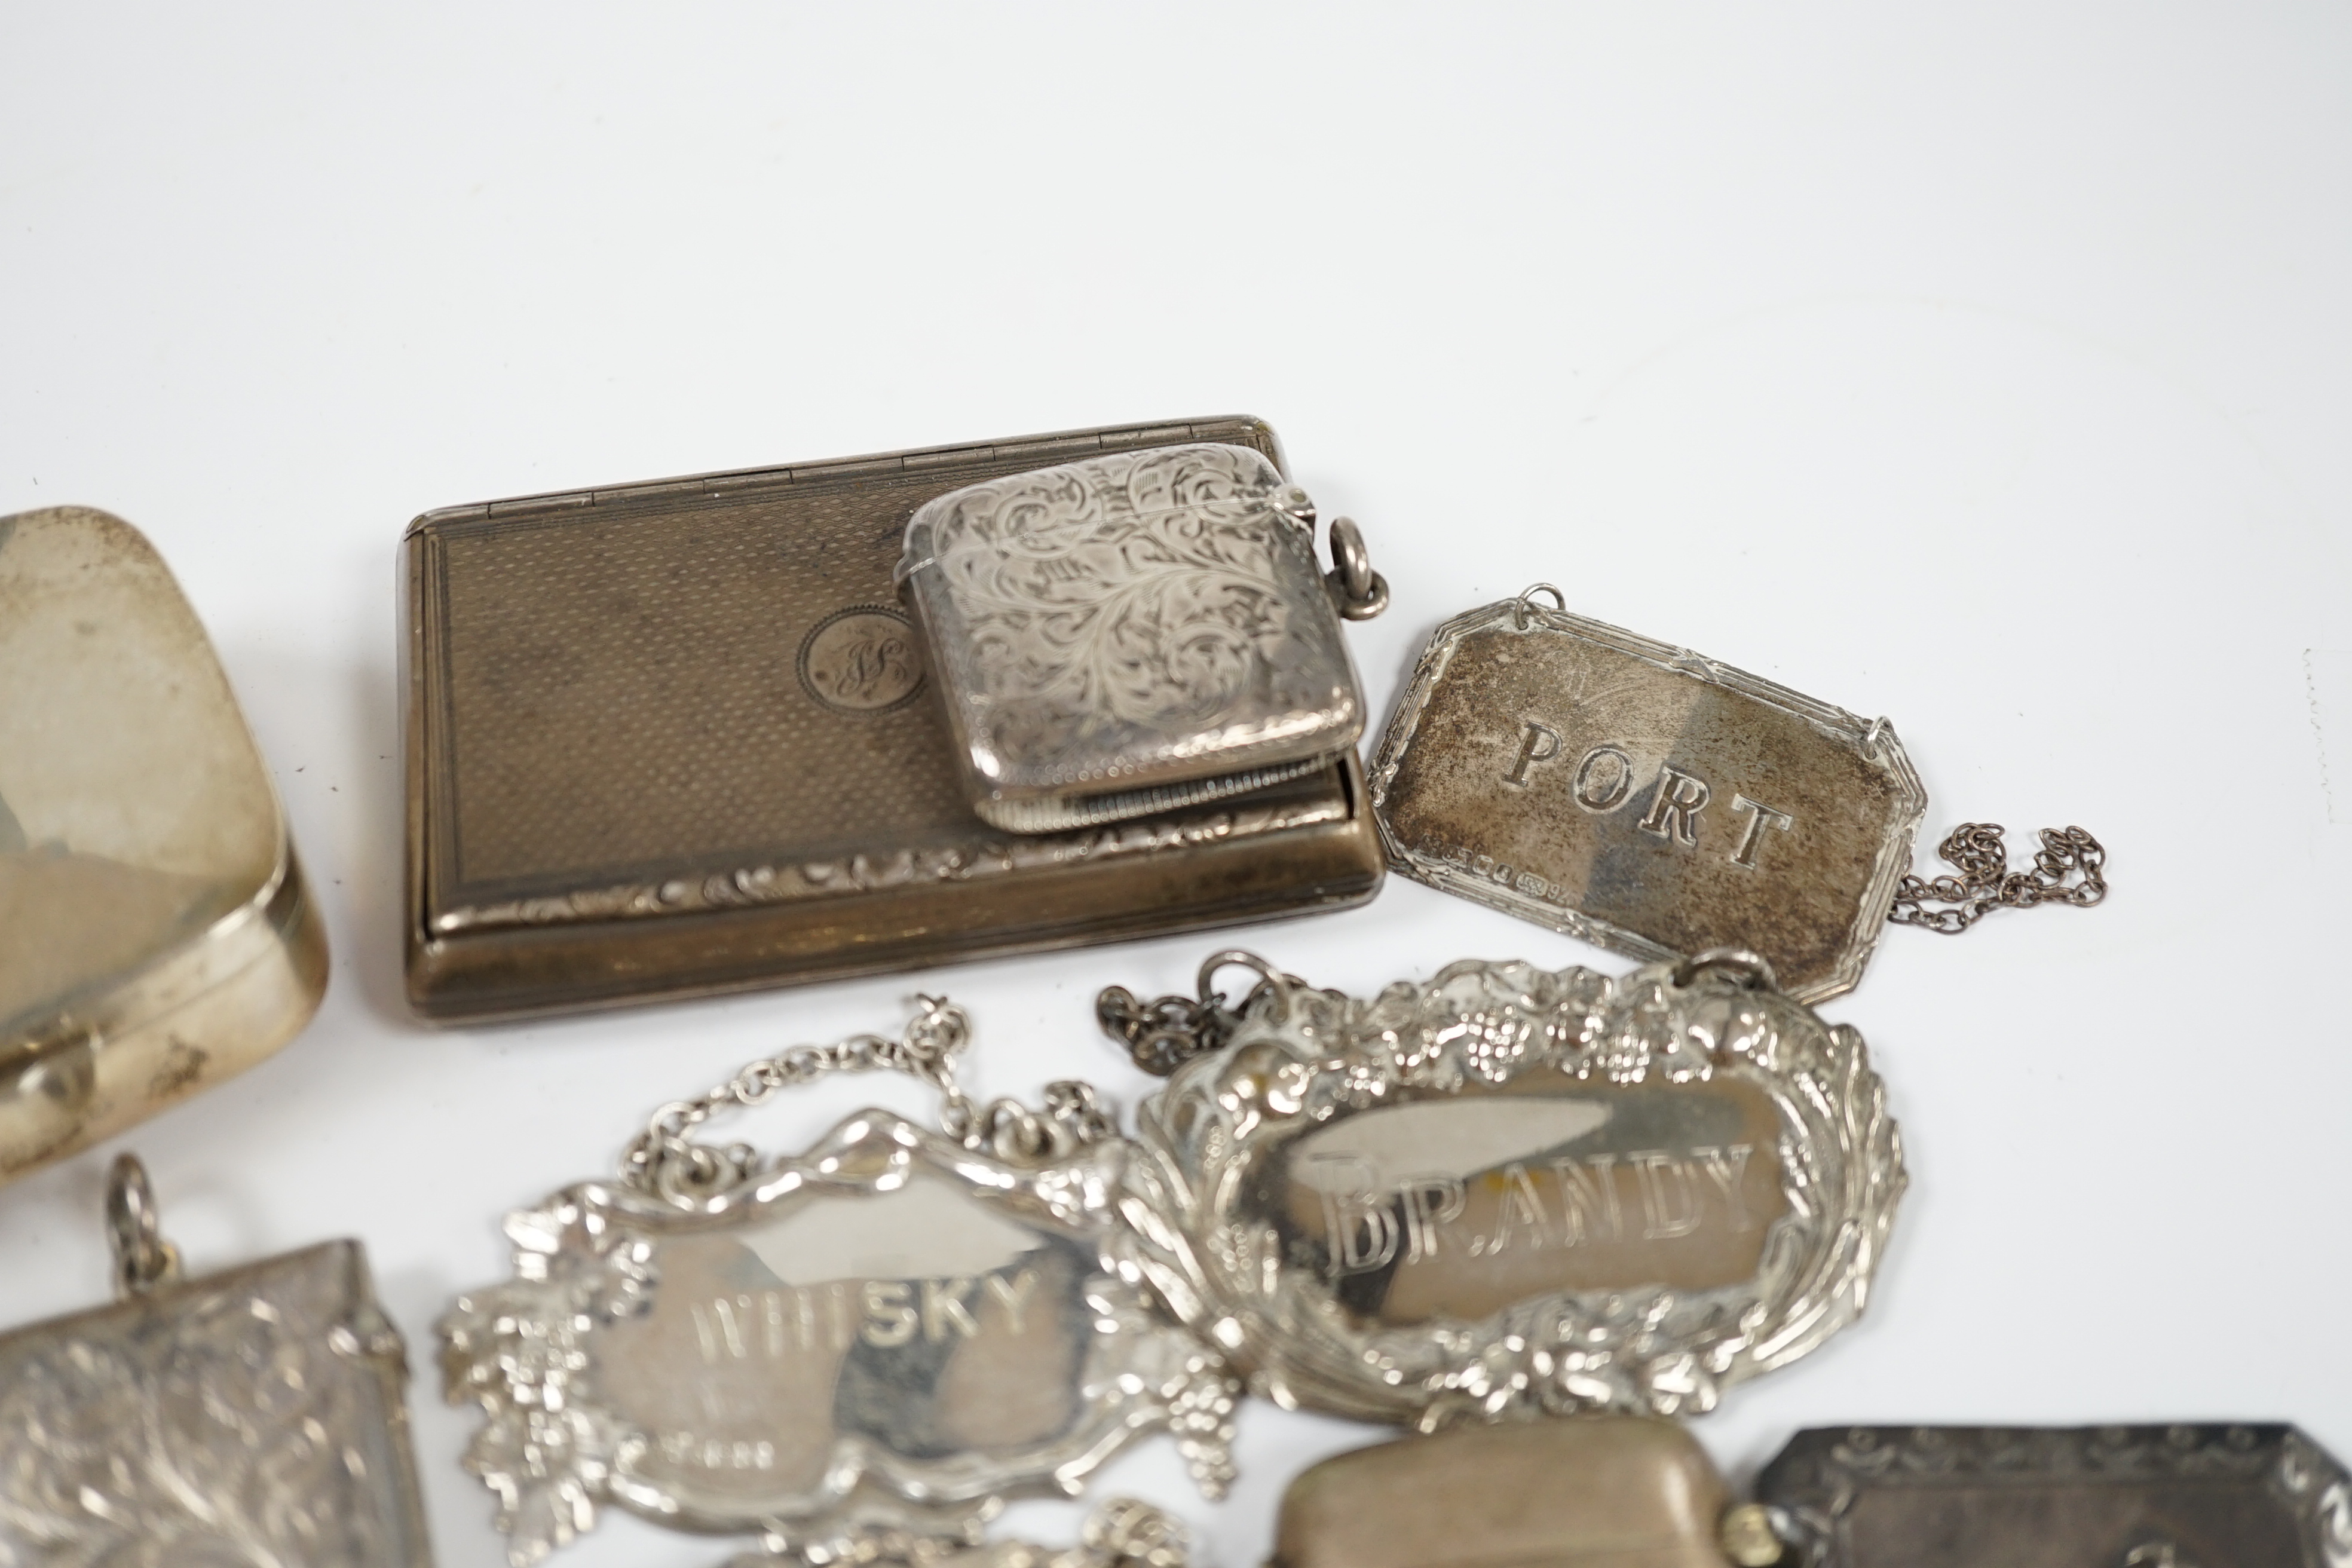 Sundry small silver and plated items including wine labels, vest cases, sovereign case and a Victorian silver snuff box, London, 1841, 79mm. Condition - poor to fair to good